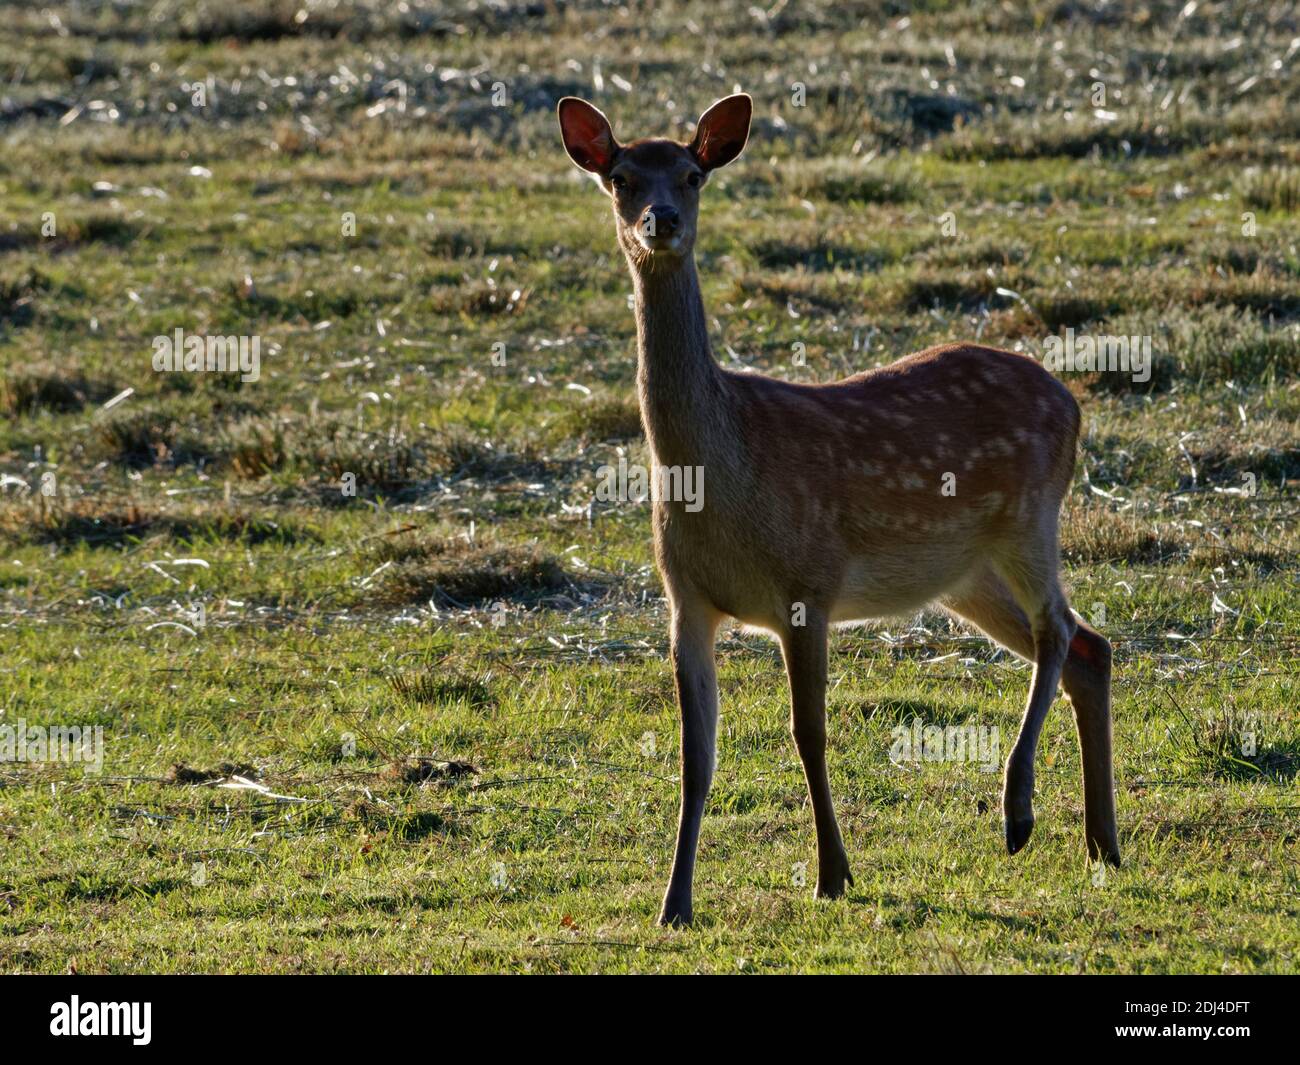 Sika deer (Cervus nippon) alert hind looking up from grazing grass in a meadow, backlit at dusk, near Corfe Castle, Dorset, UK, July. Stock Photo